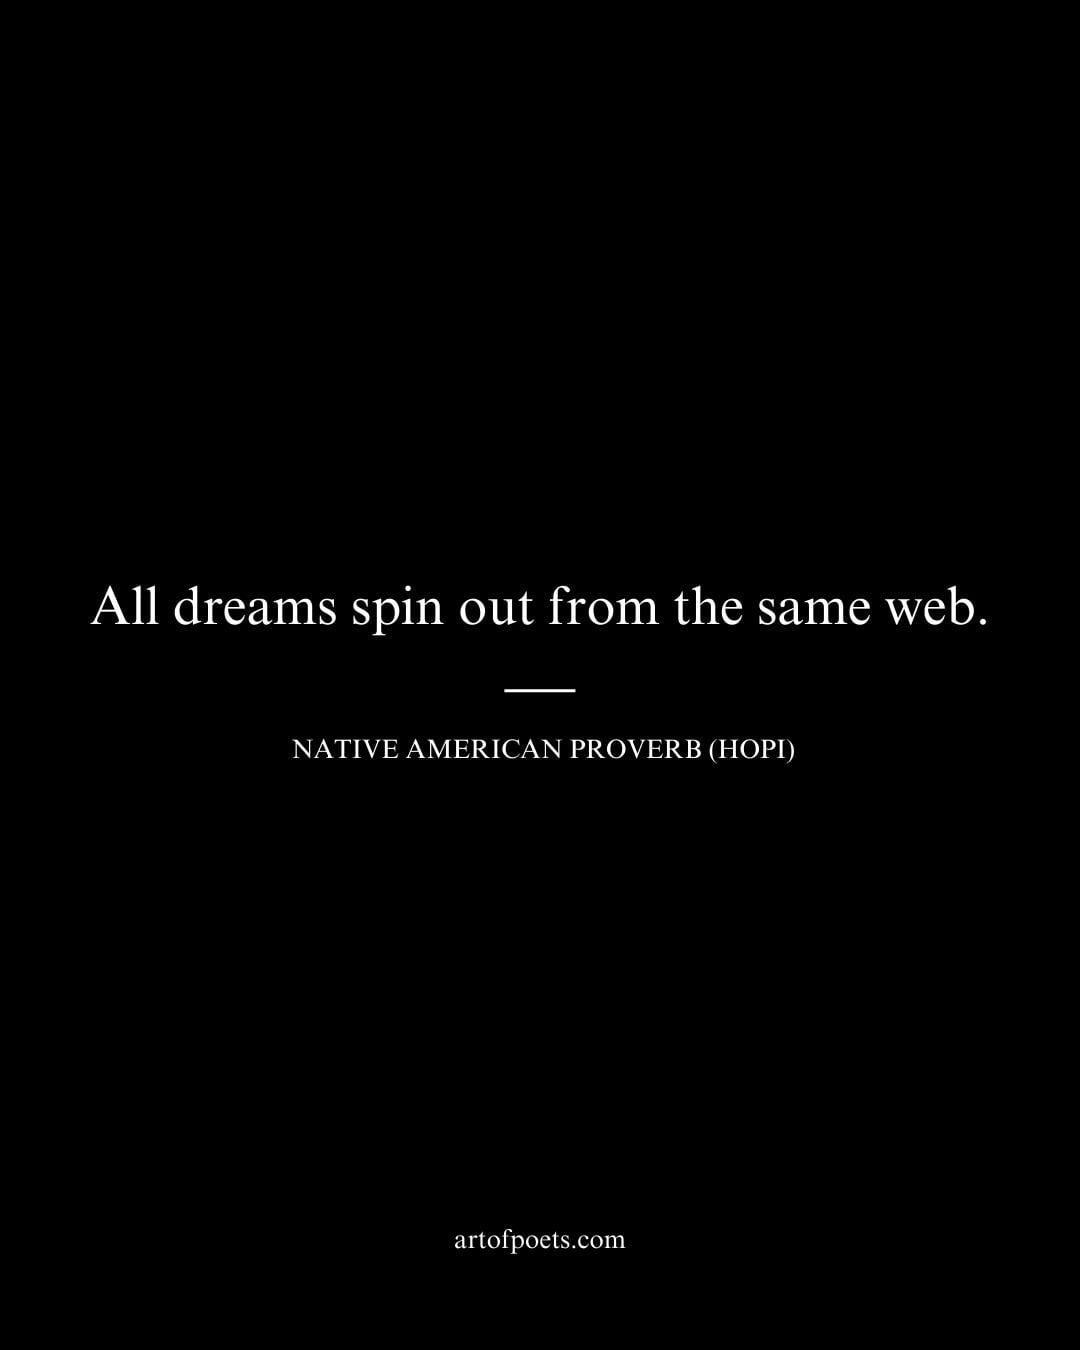 All dreams spin out from the same web